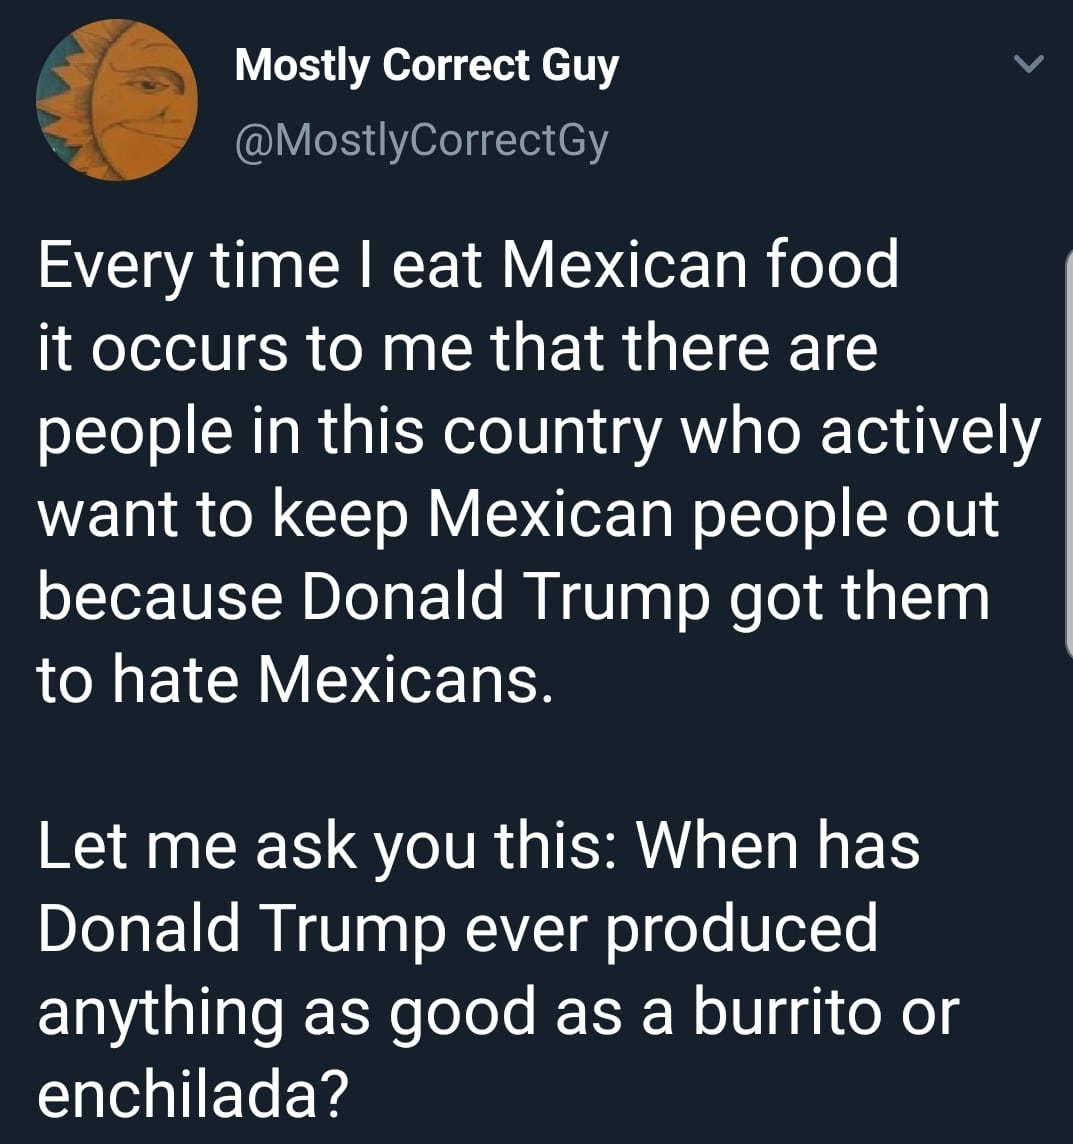 political political-memes political text: Mostly Correct Guy @MostlyCorrectGy Every time I eat Mexican food it occurs to me that there are people in this country who actively want to keep Mexican people out because Donald Trump got them to hate Mexicans. Let me ask you this: When has Donald Trump ever produced anything as good as a burrito or enchilada? 